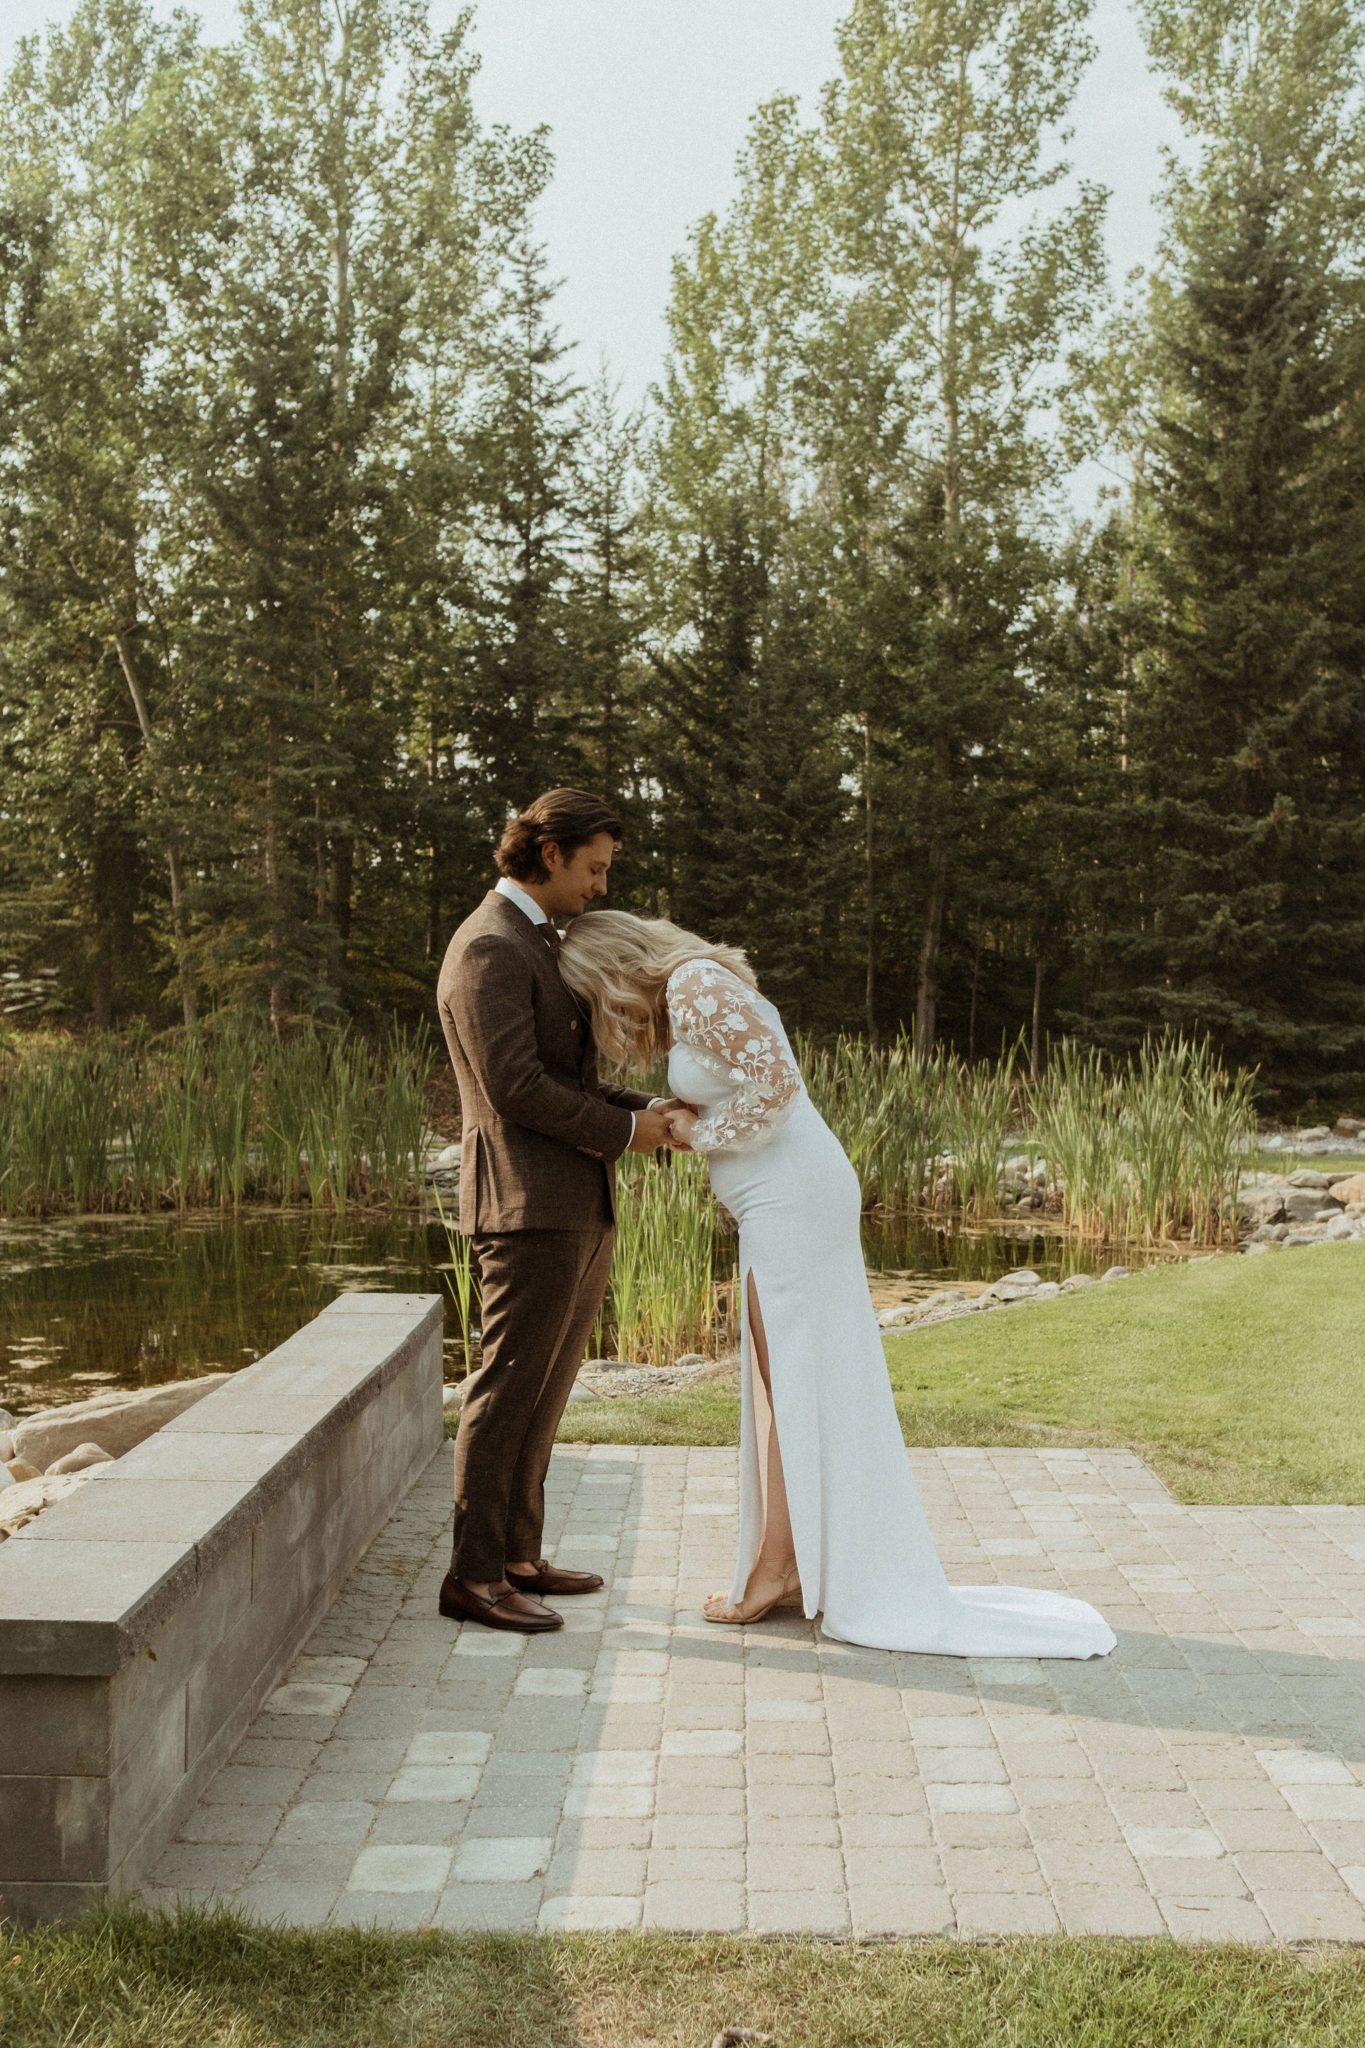 First look on wedding day at outdoor summer wedding, cottage core wedding inspiration